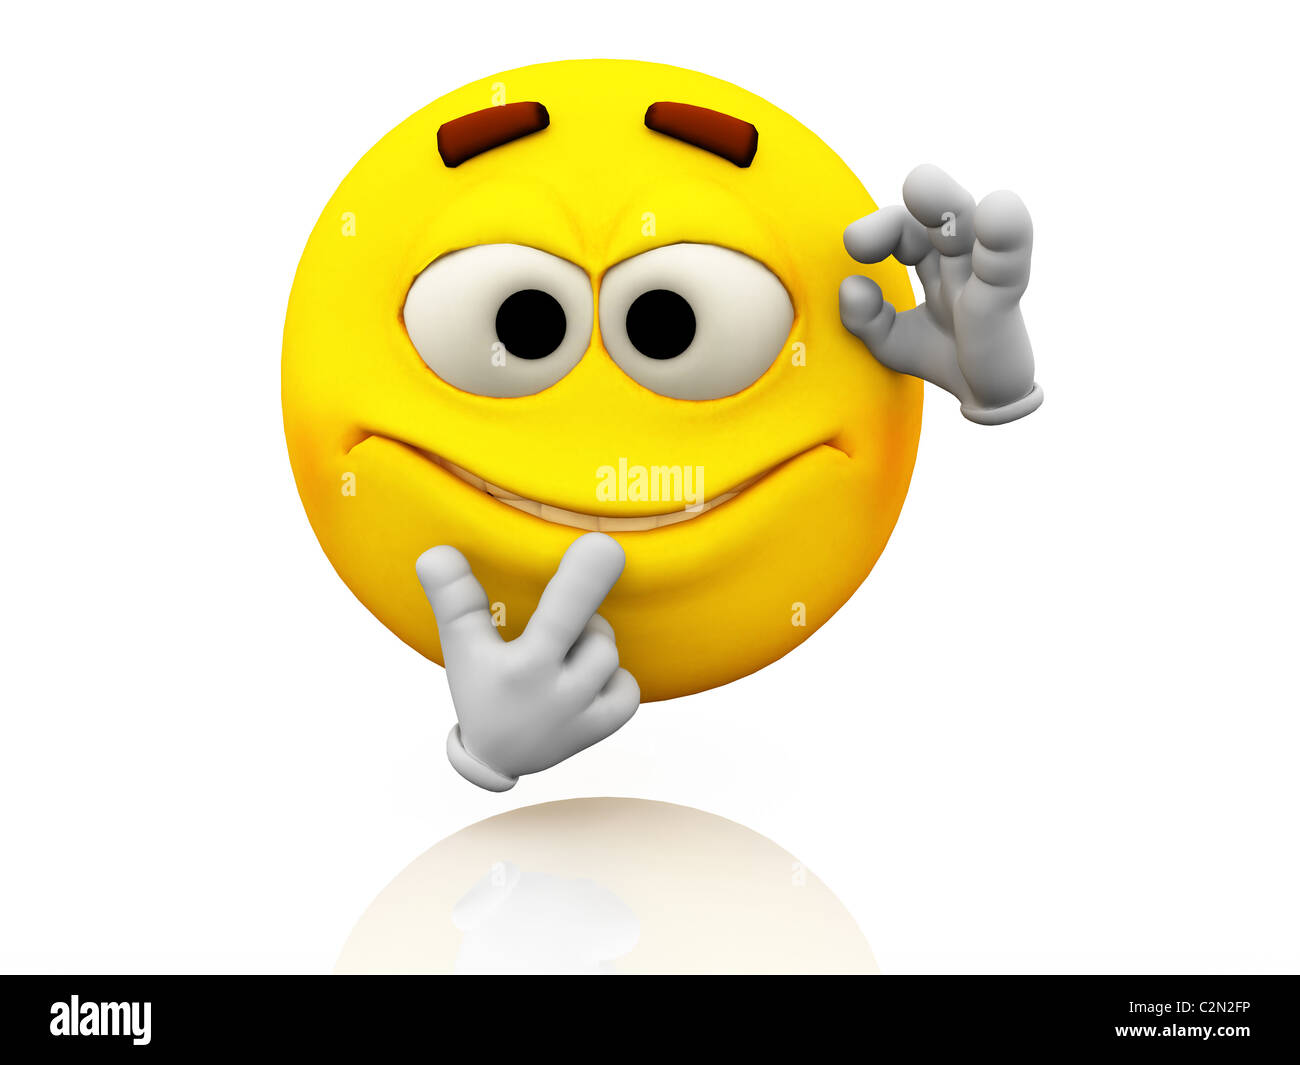 Smiley, Emoticon. Facial expression. Nerd emotional expression on a yellow face with large eyes. Nerd gesture. Stock Photo